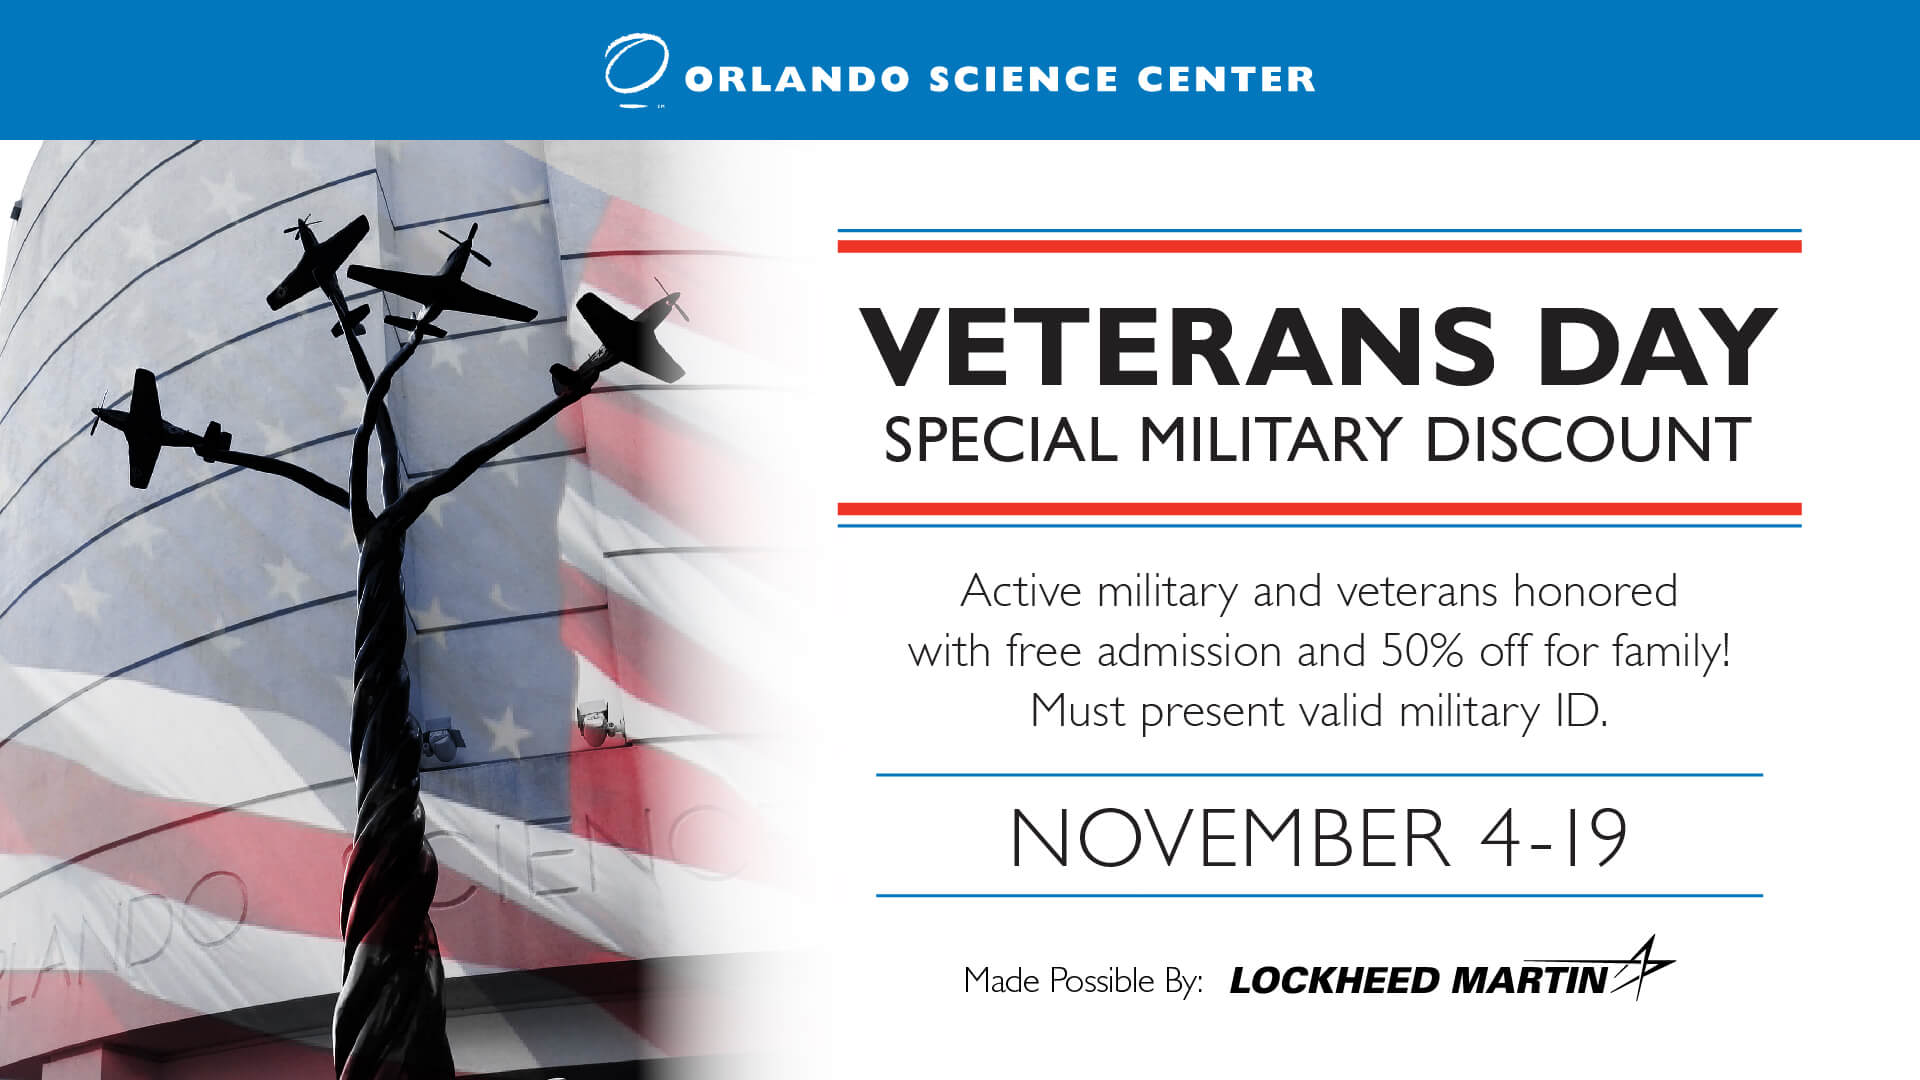 Veterans Day Special Military Discount – November 4-19, Made Possible by Lockheed Martin